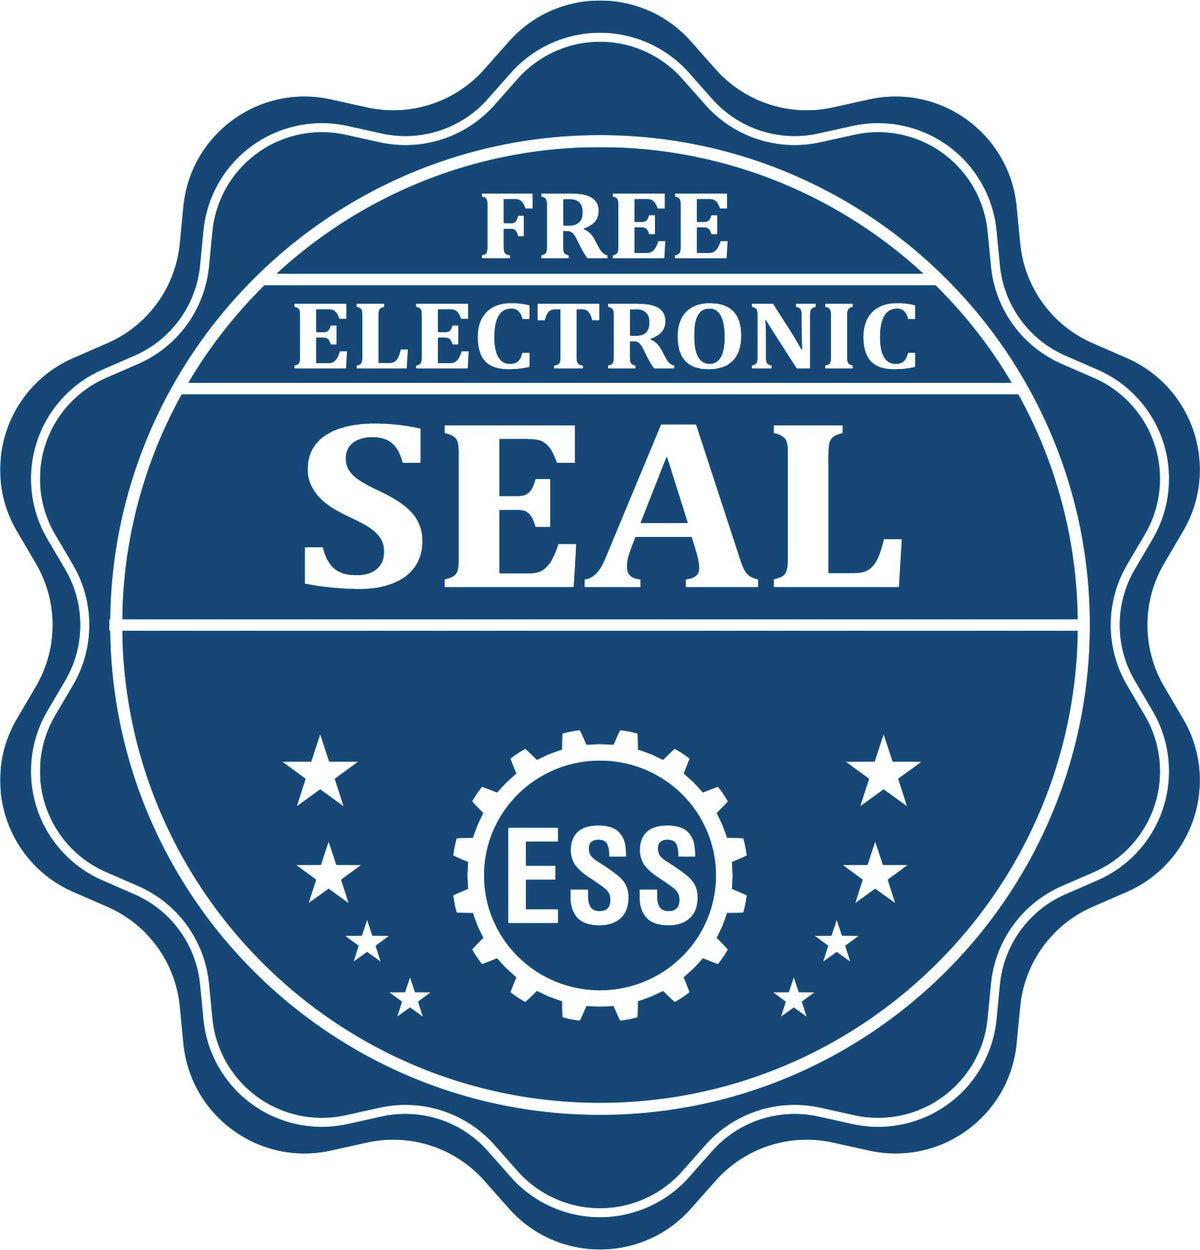 A badge showing a free electronic seal for the Heavy-Duty Arizona Rectangular Notary Stamp with stars and the ESS gear on the emblem.